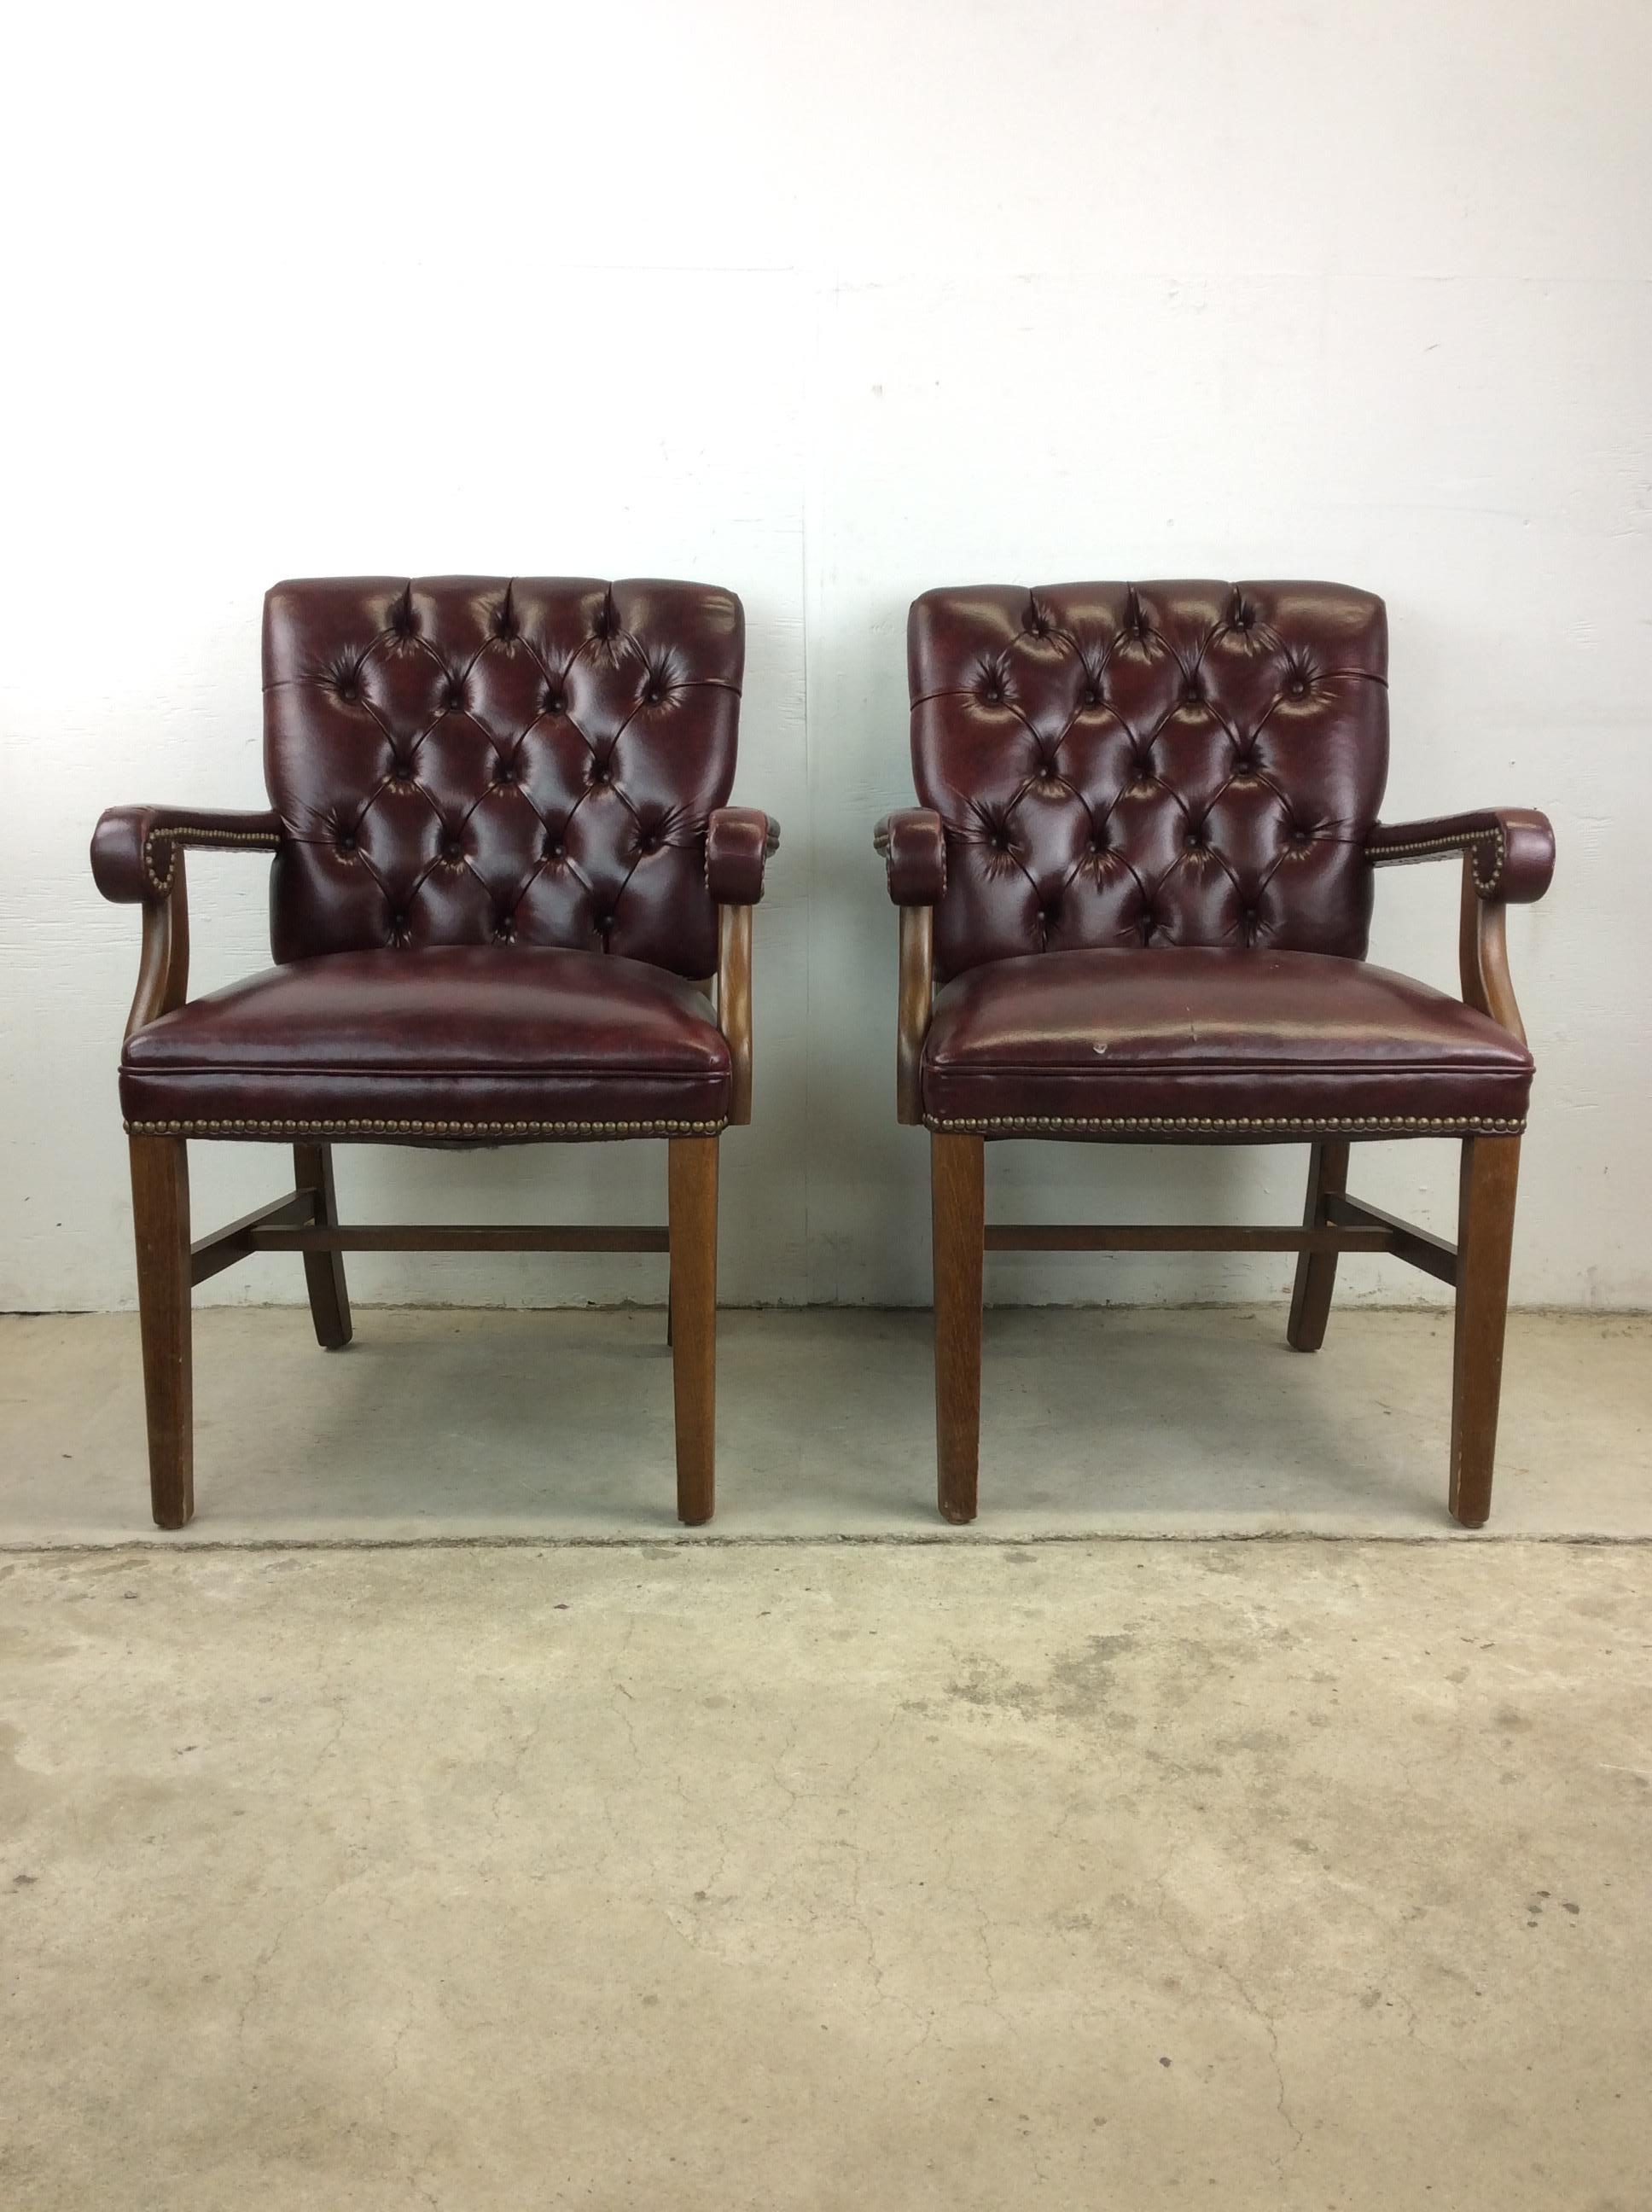 This pair of vintage Chesterfield style arm chairs feature vintage red leather upholstery, tufted seat backs, and hardwood arms and base.

Dimensions: 25w 26d 35h 20sh 25ah

Condition: Upholstery is in good original condition with only some light